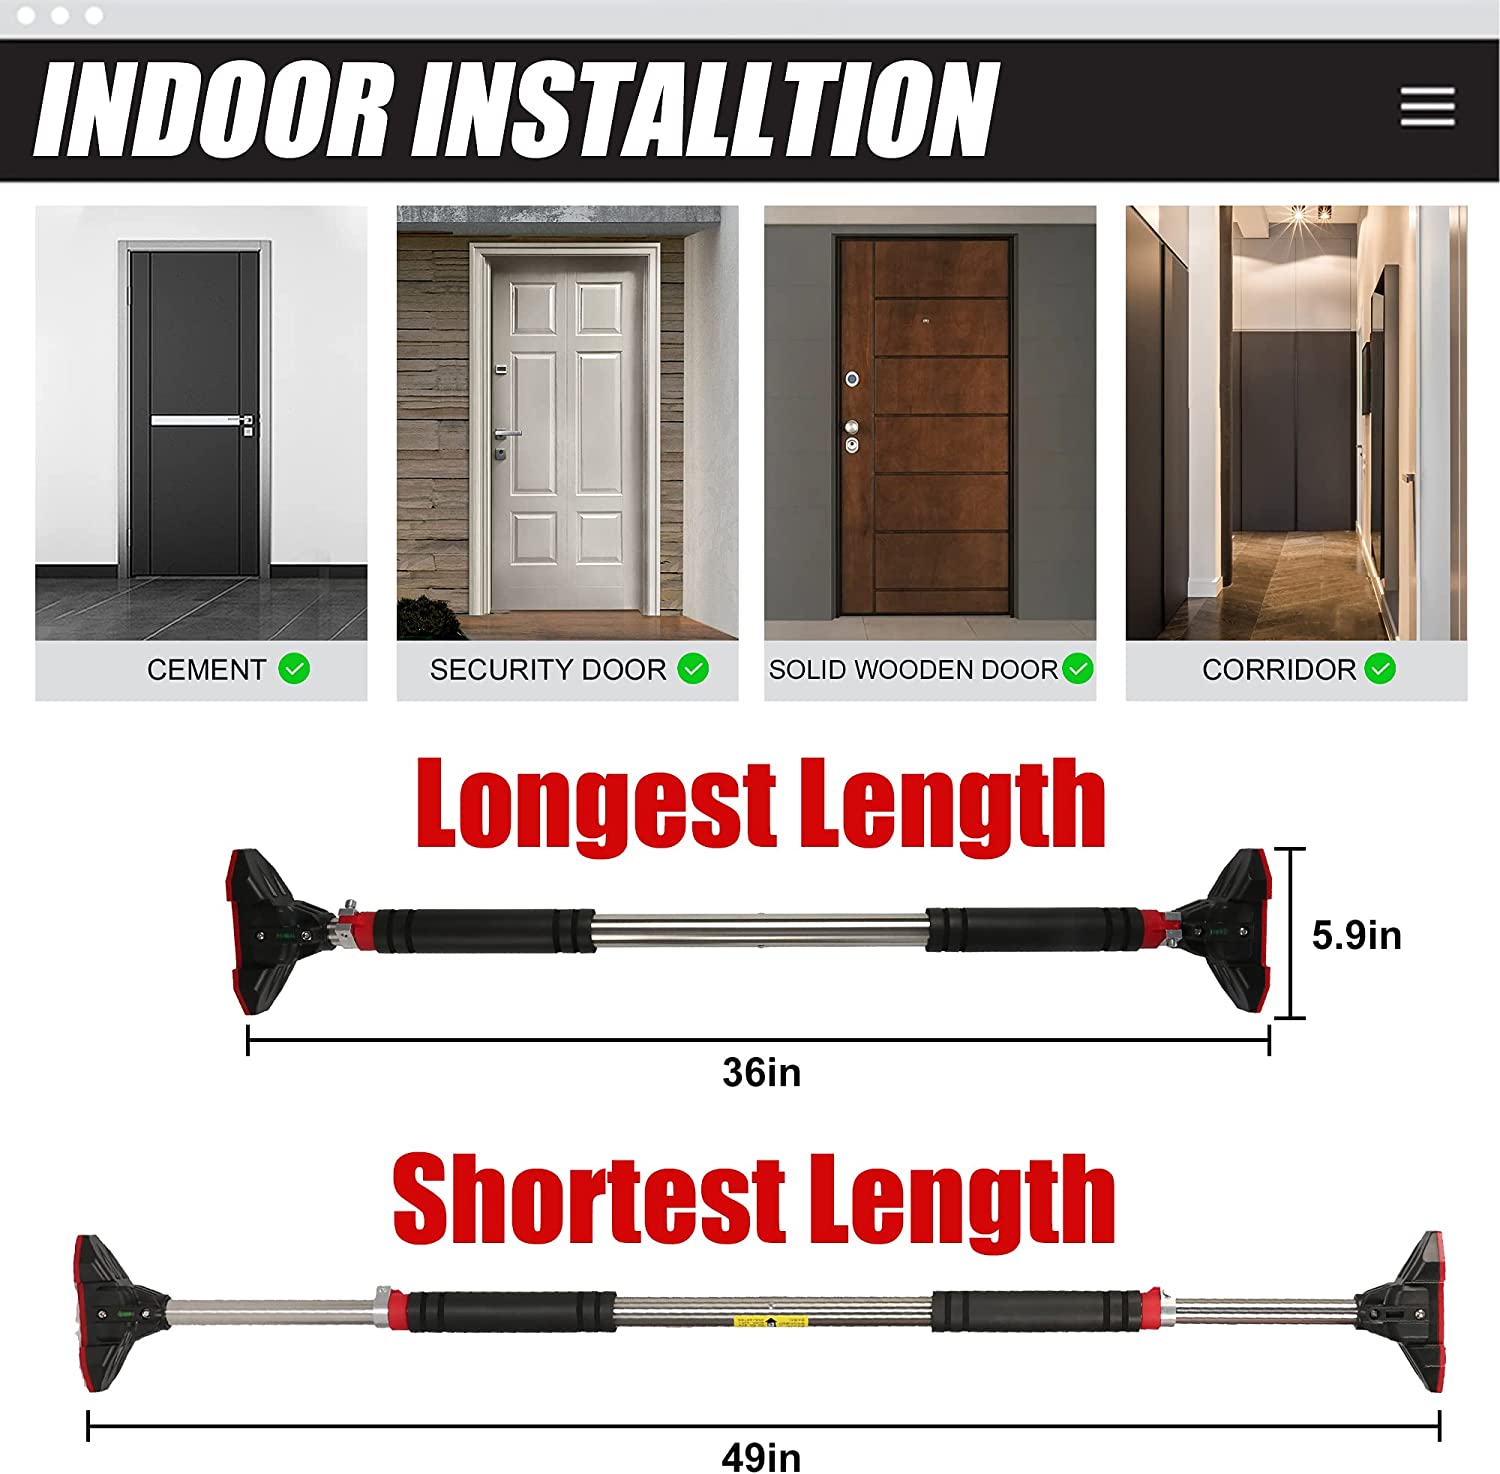 (Out of Stock) 2 X Doorway Pull up Bar Multifunctional Locking Chin Up Bar w/ Adjustable Width